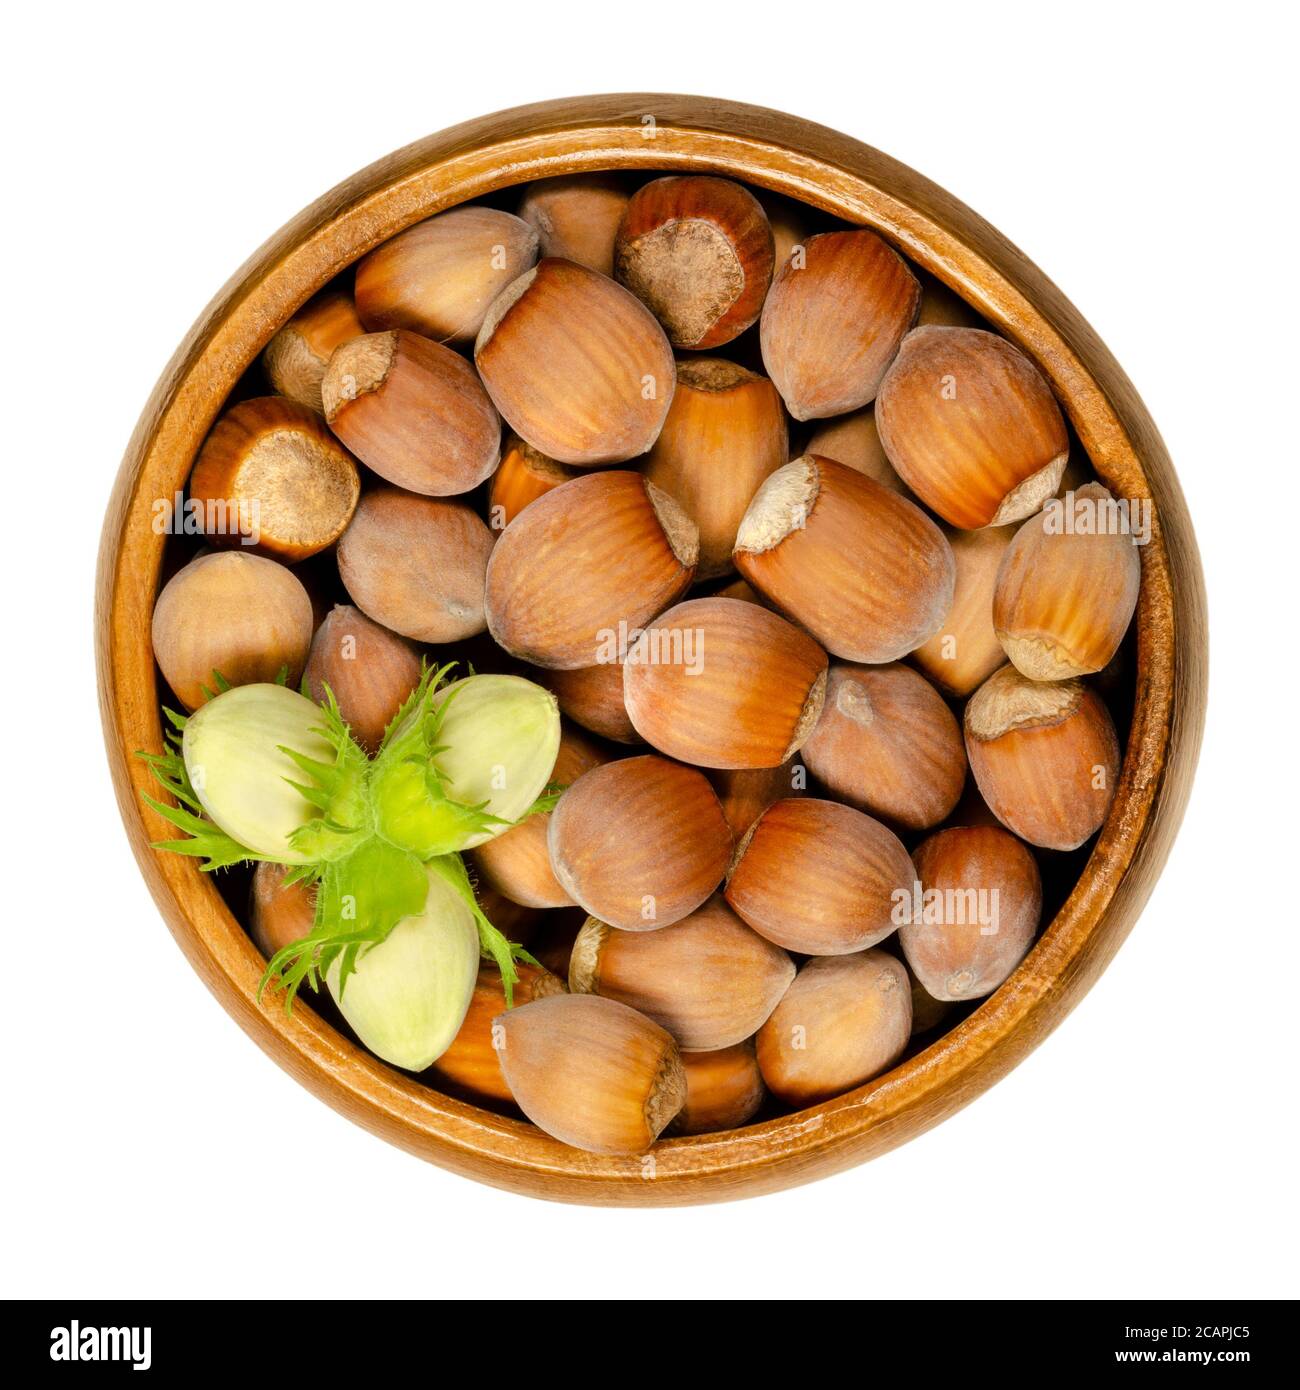 Ripe and unripe unshelled hazelnuts in wooden bowl. Seeds of Corylus avellana, species native in Europe. Edible raw fruits in their shells. Stock Photo